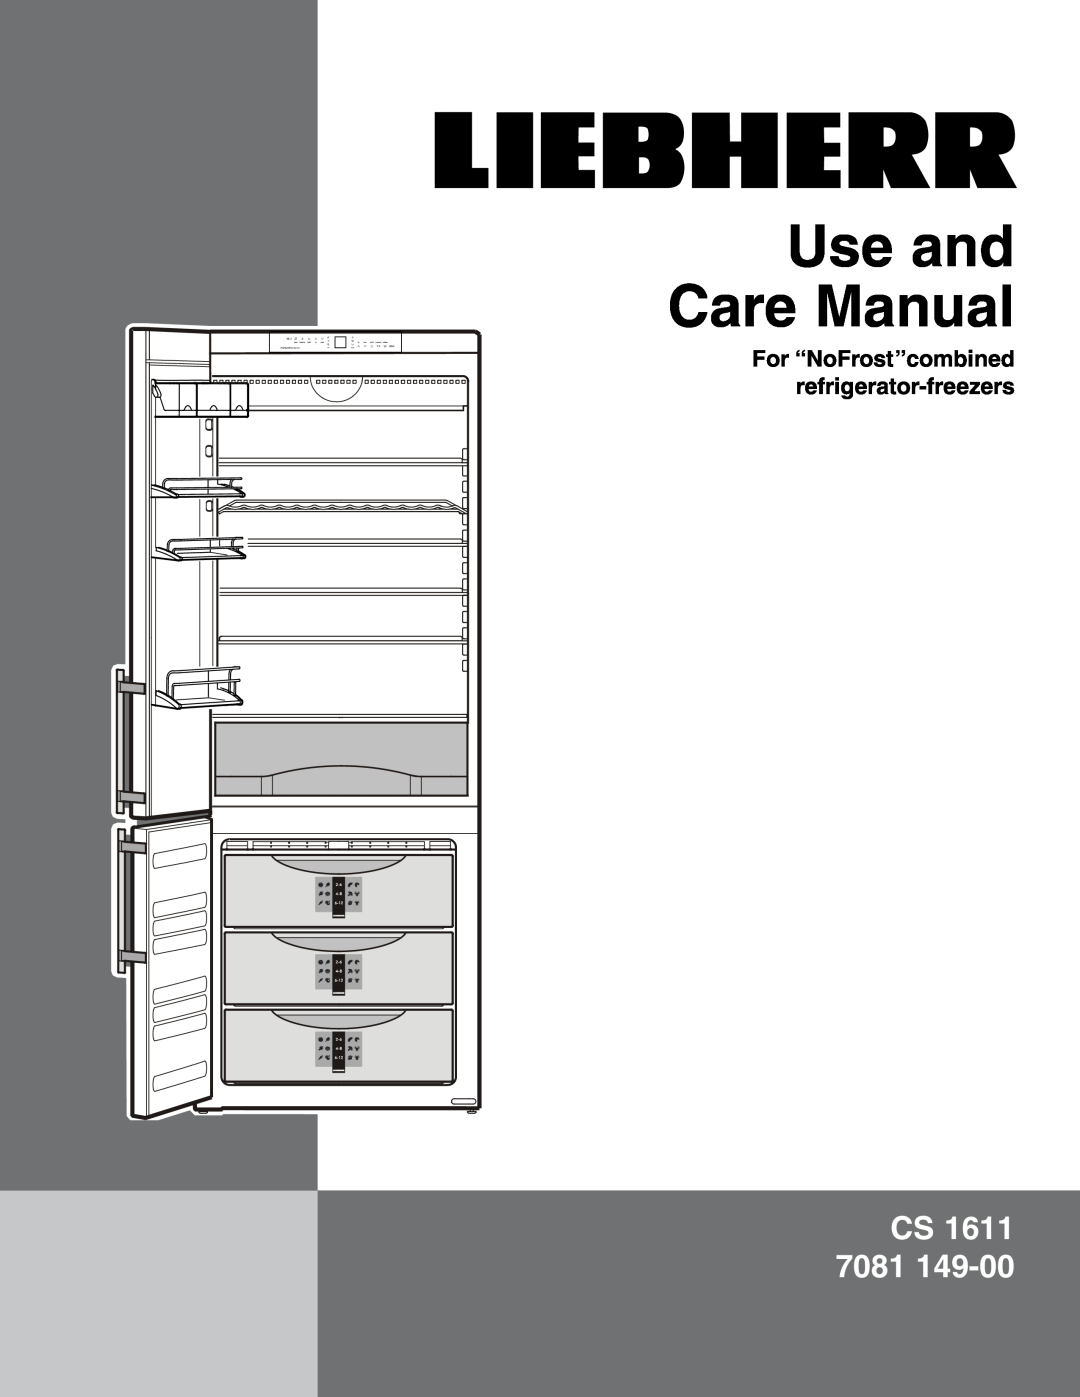 Liebherr CS 1611 7801 149-00 manual Use and Care Manual, For “NoFrost”combined refrigerator-freezers 